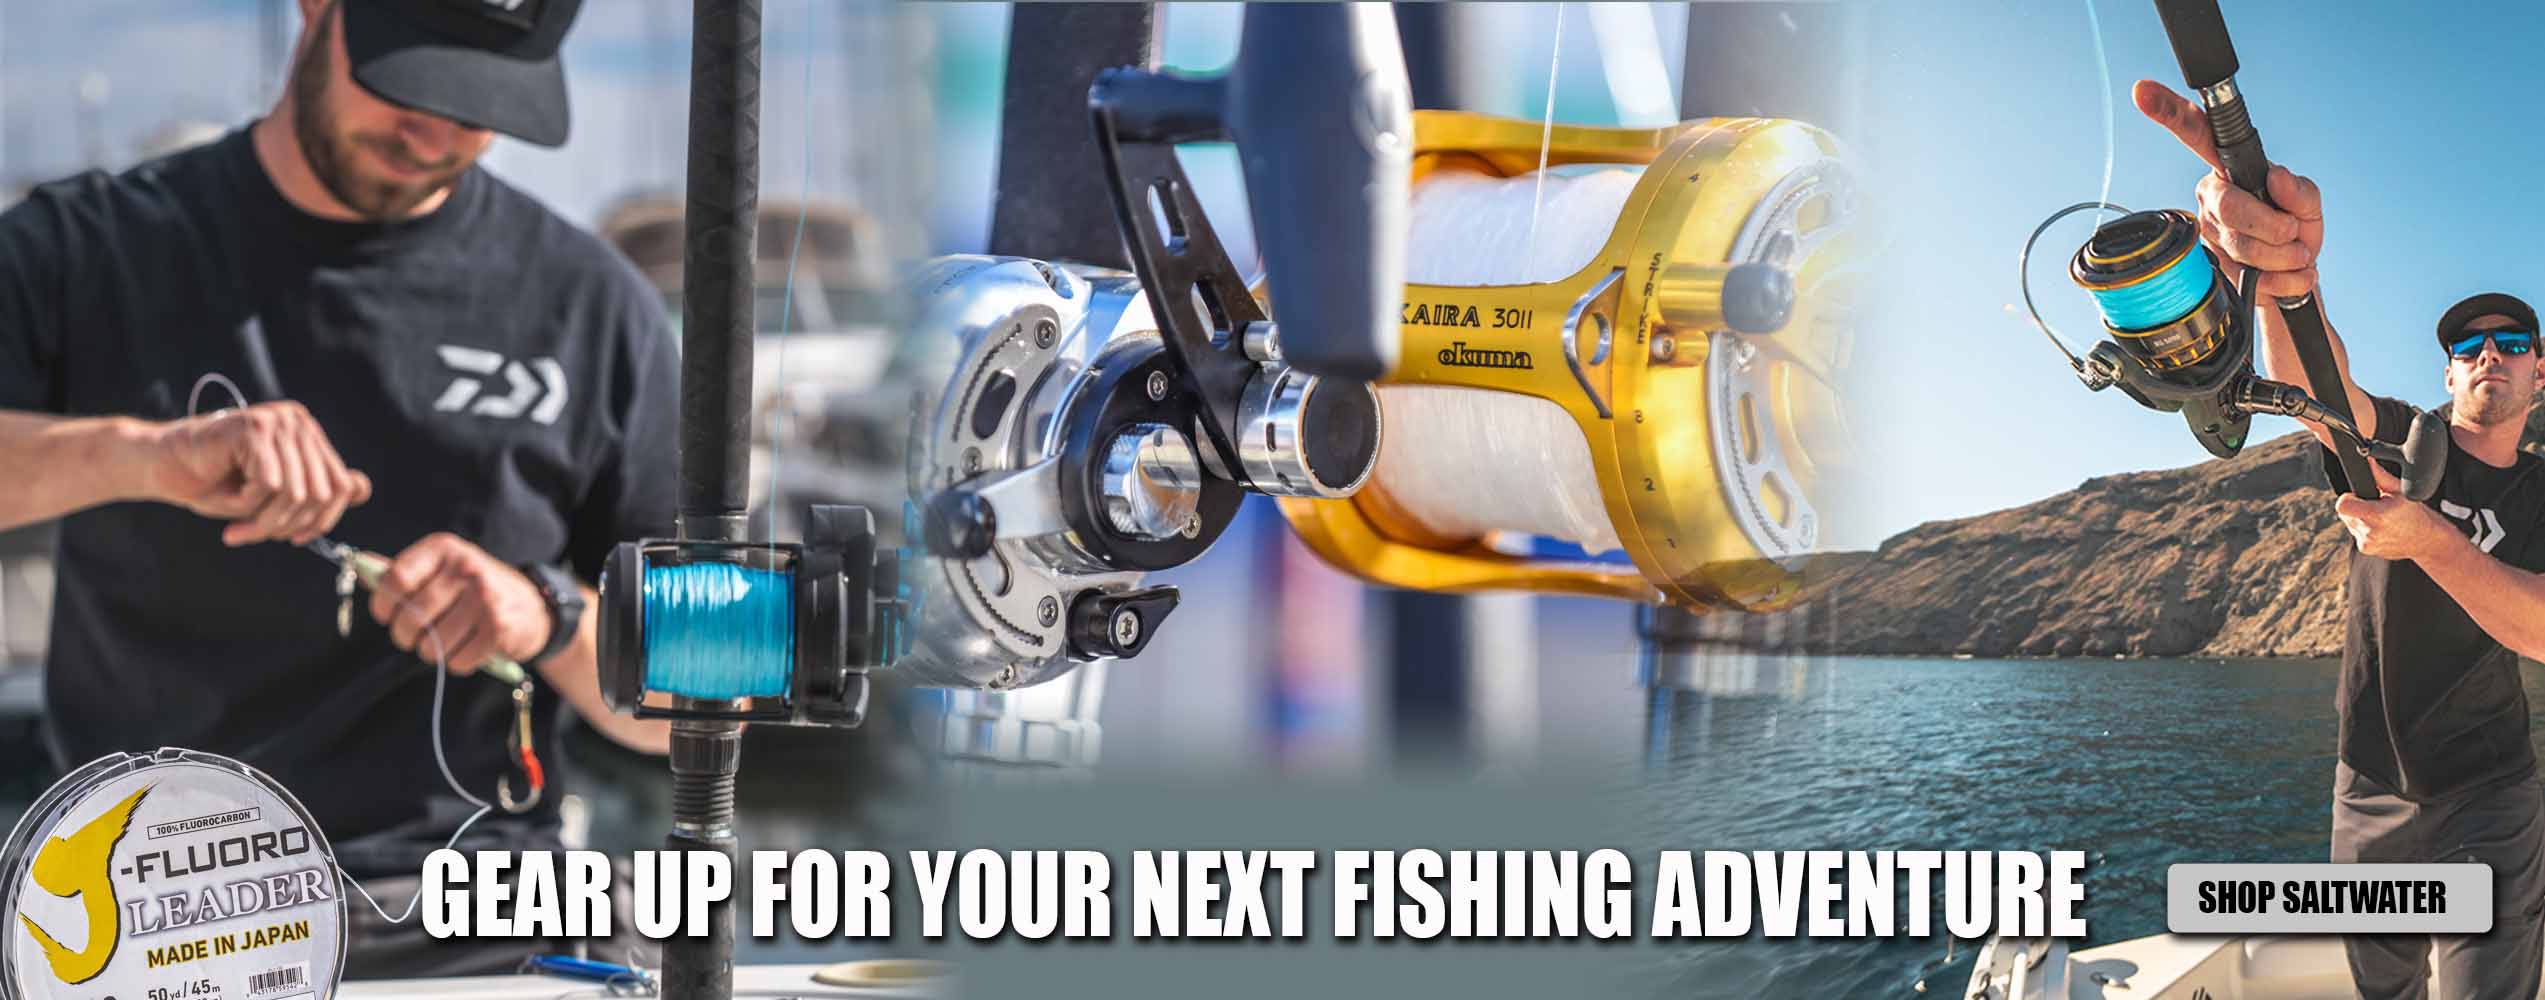 Gear Up for you next Fishing Adventure